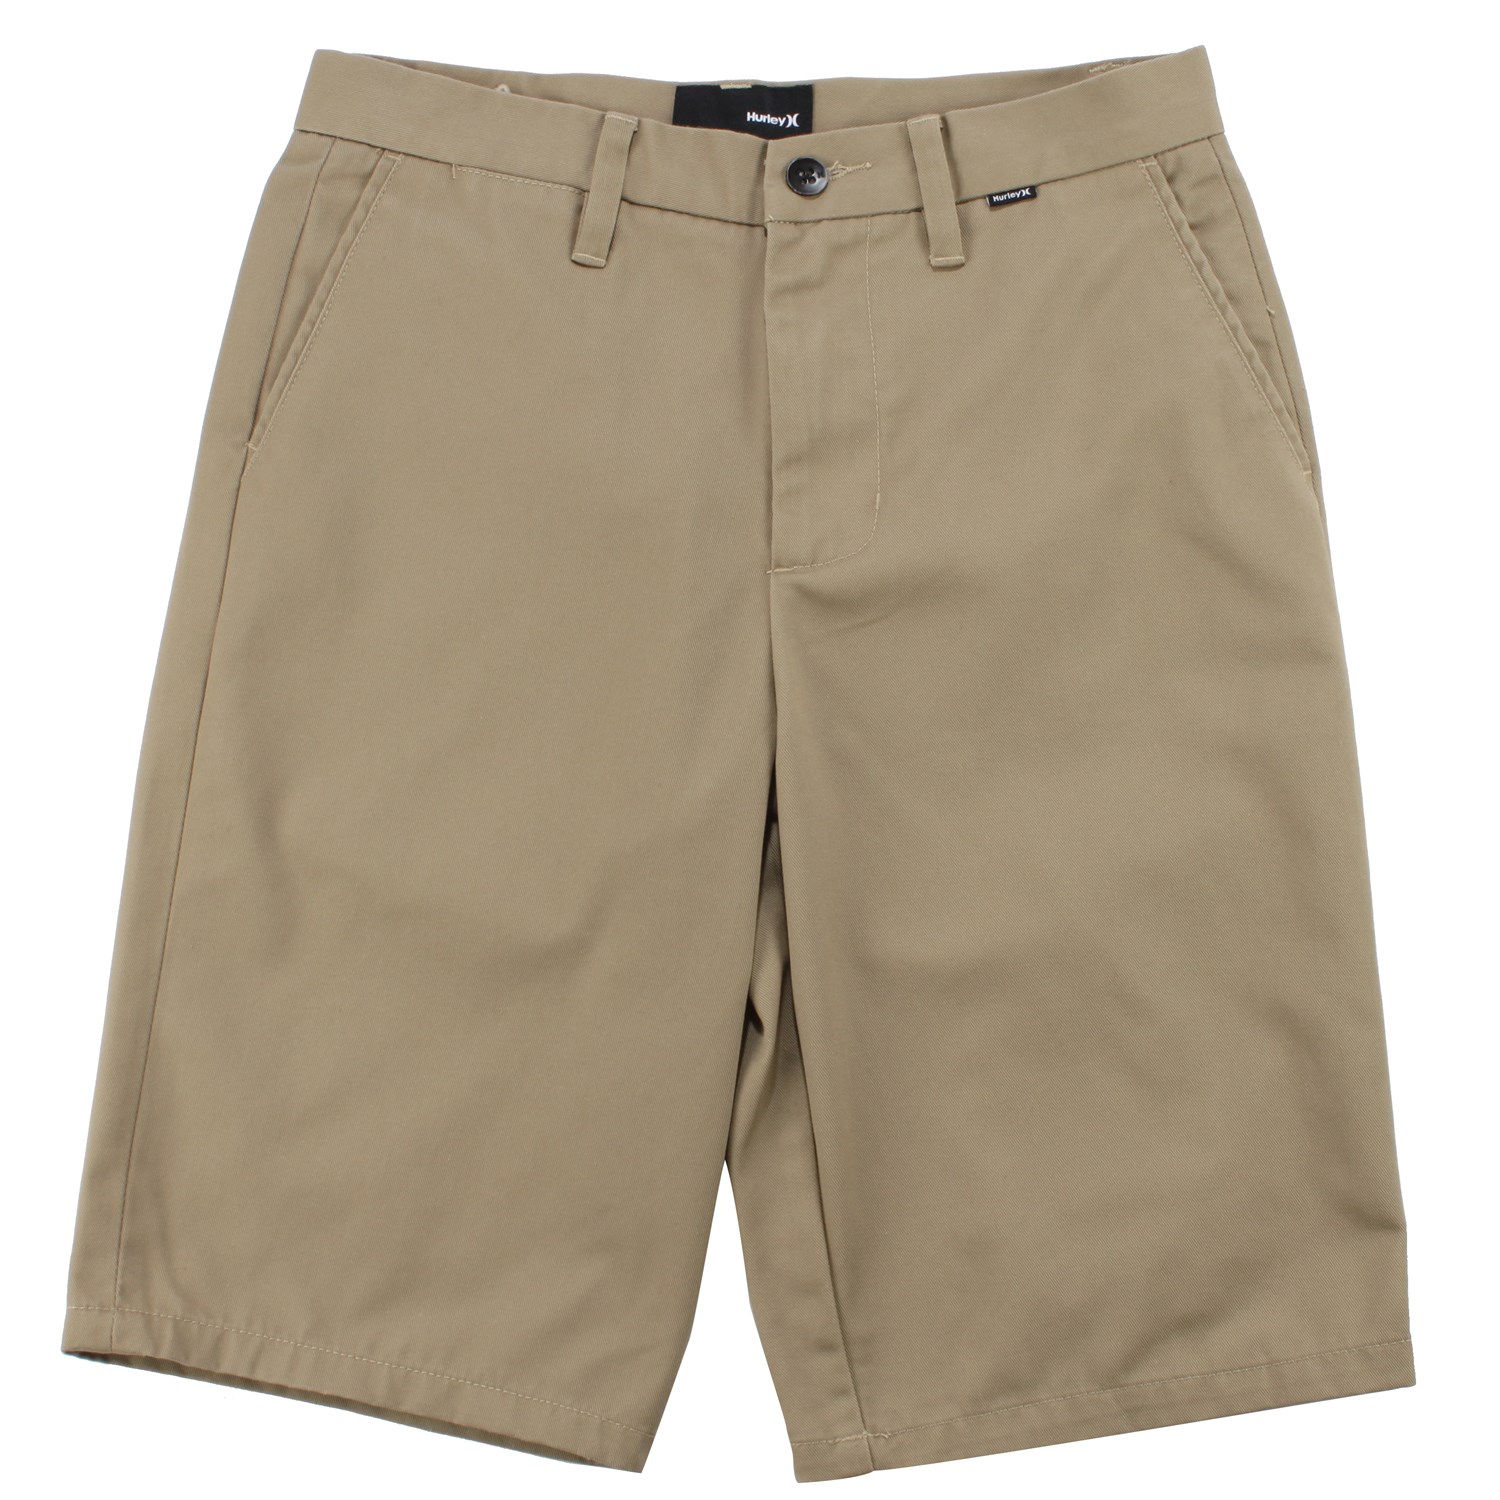 Hurley One & Only 2.0 Shorts | evo outlet